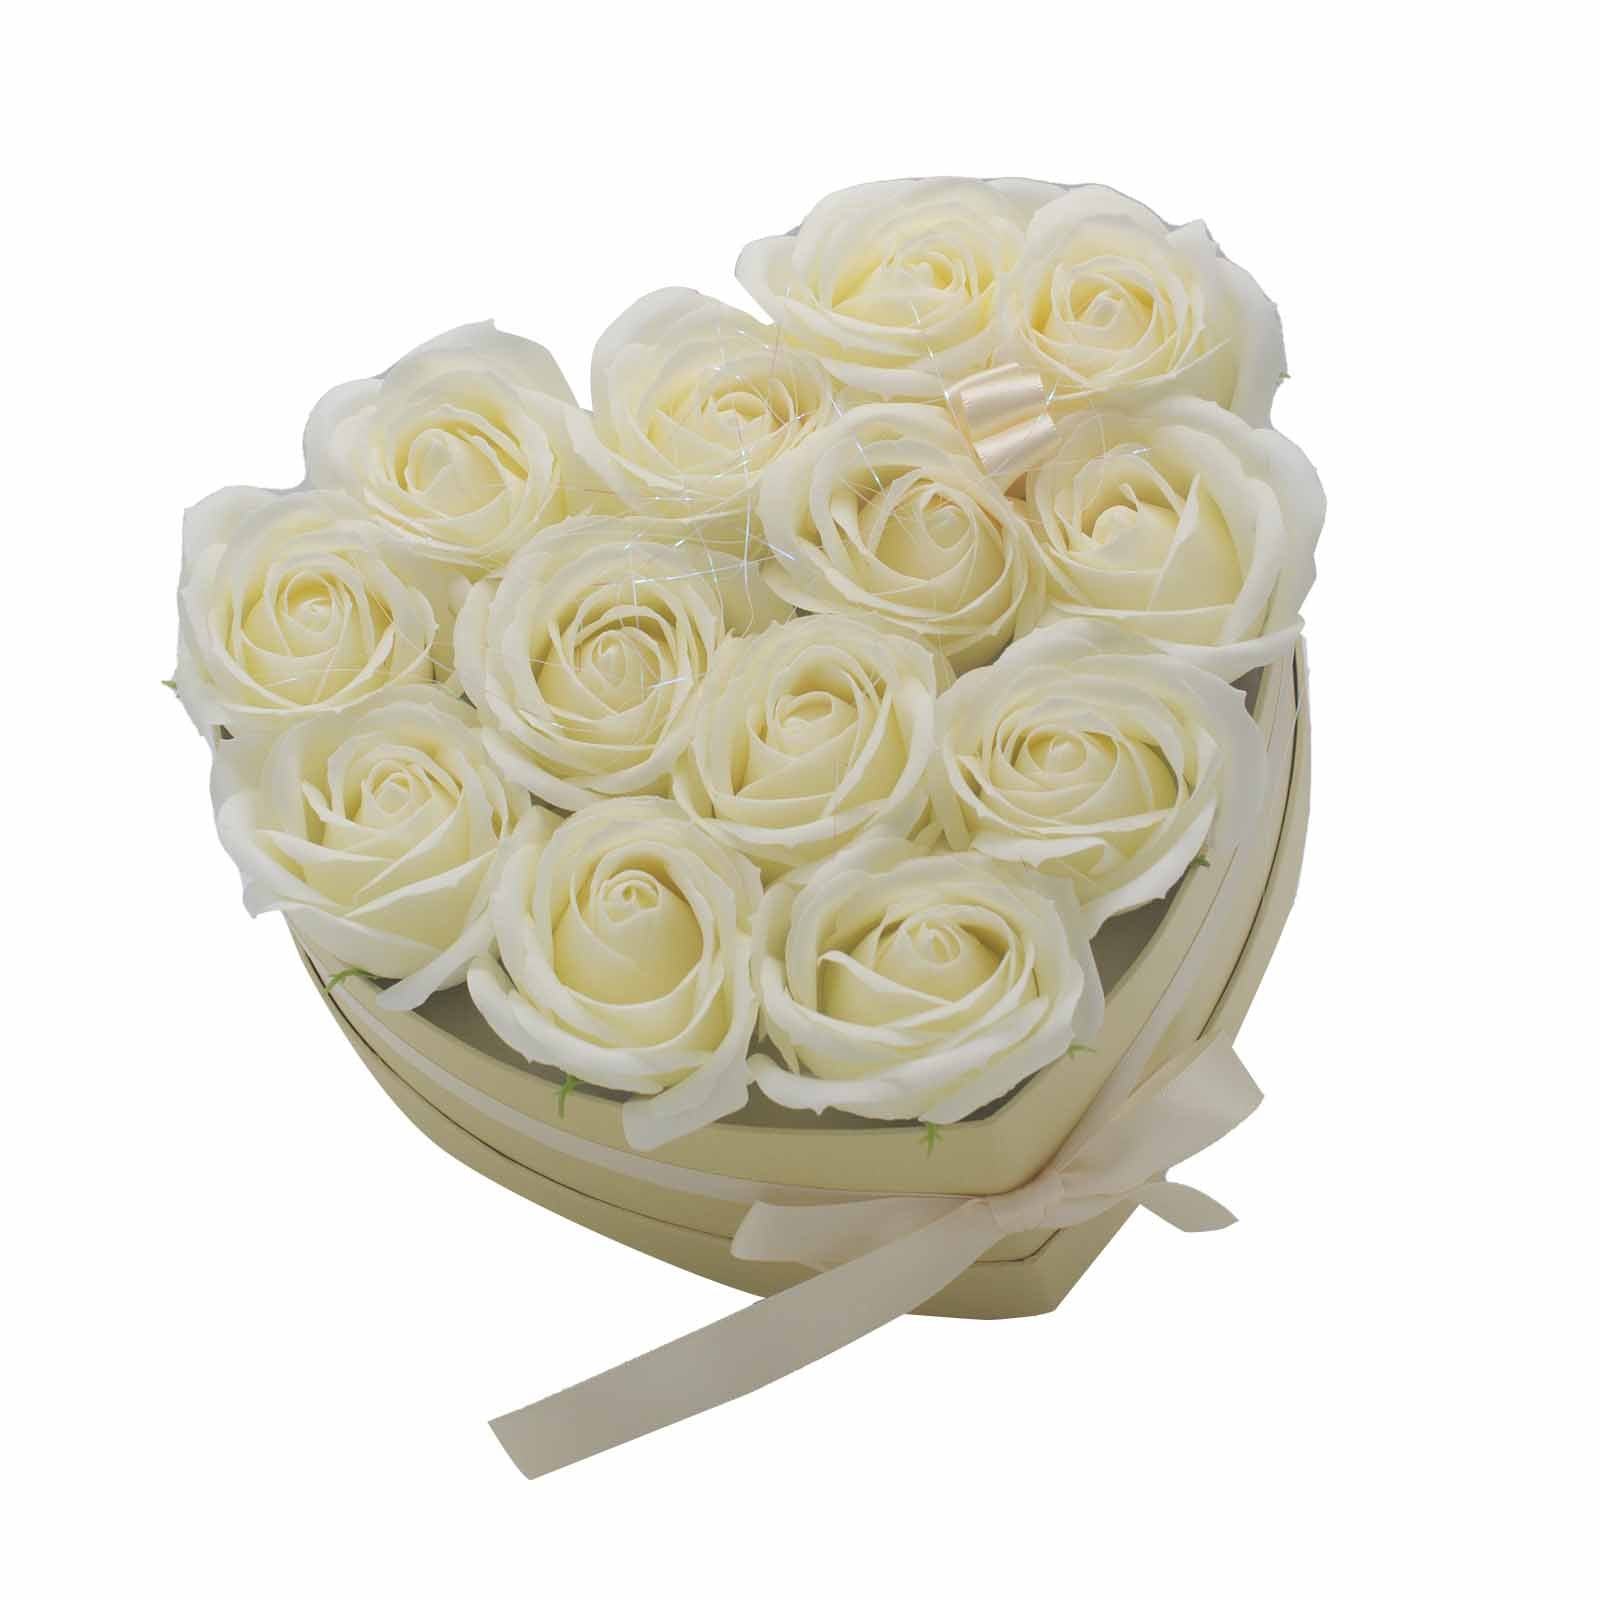 View Soap Flower Gift Bouquet 13 Cream Roses Heart information